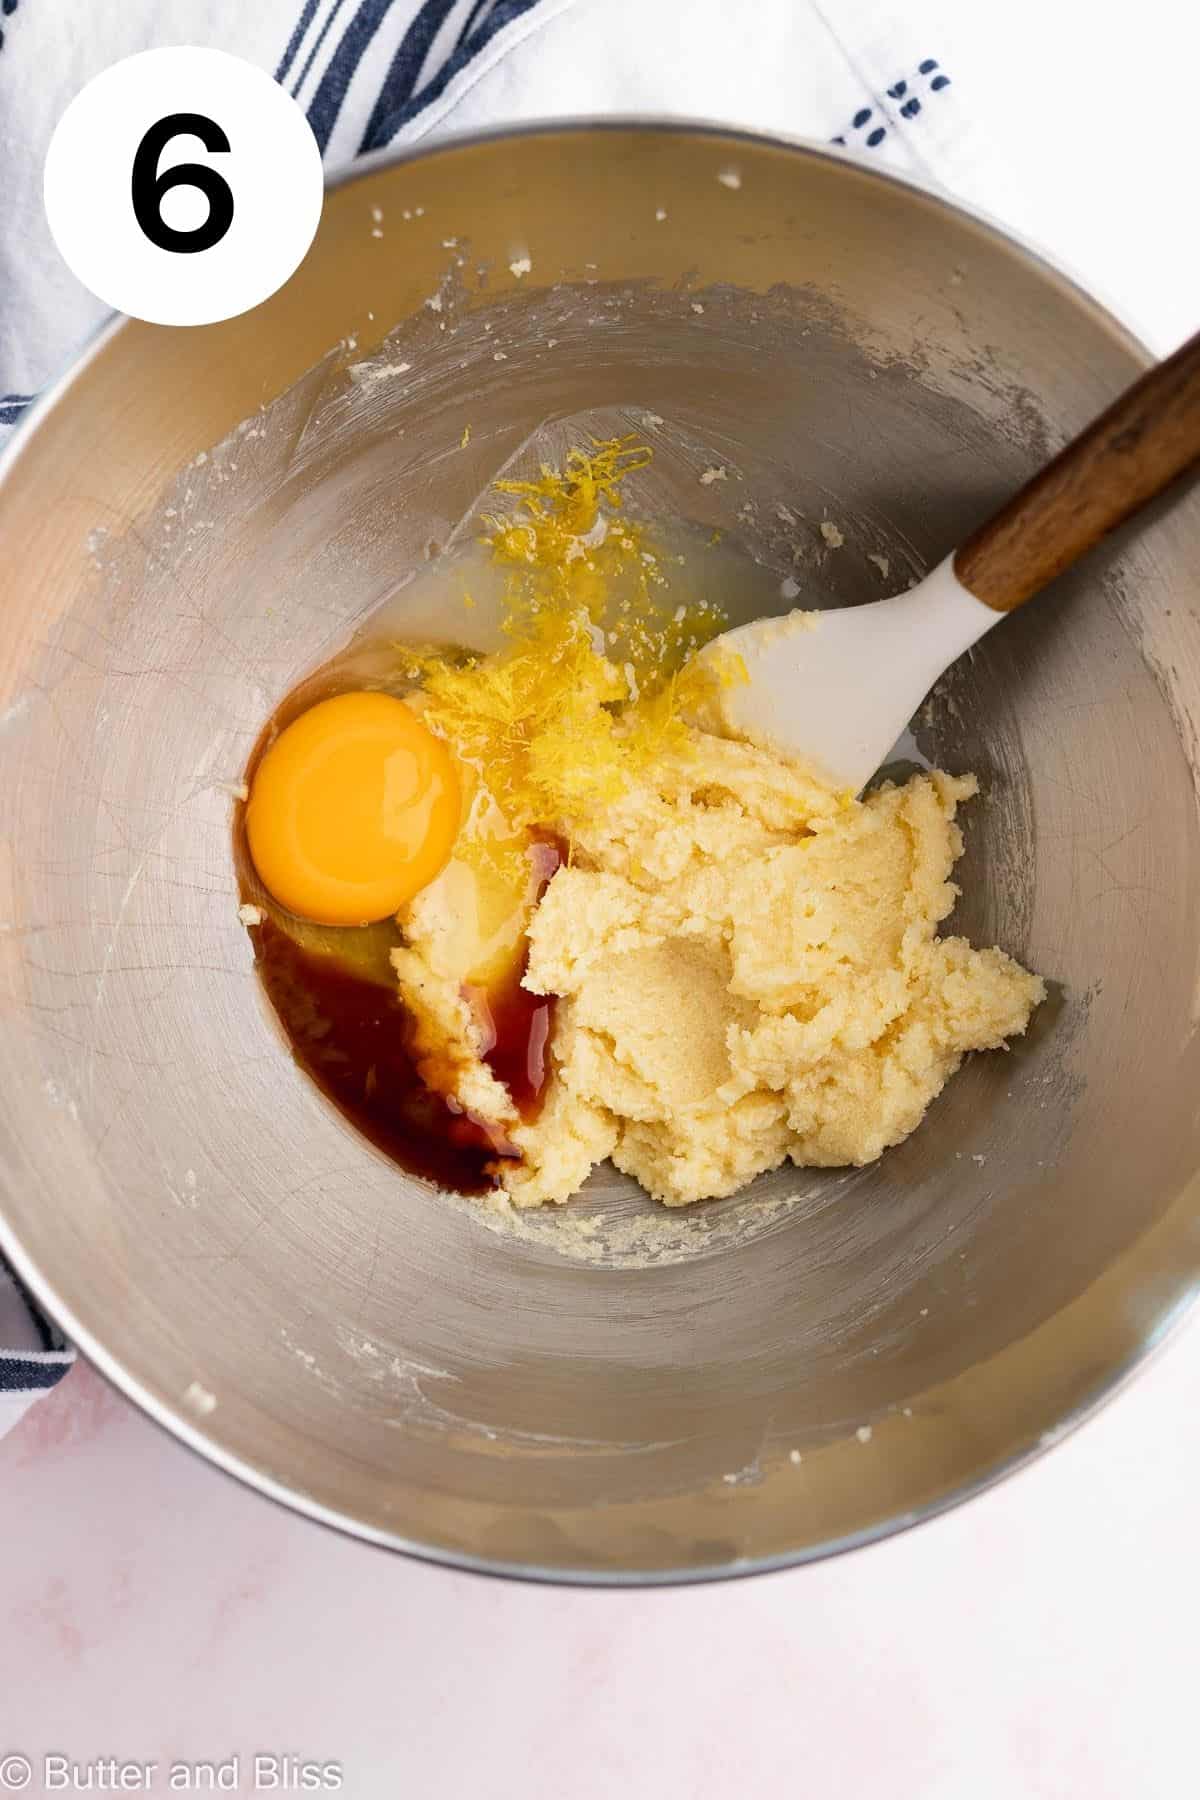 Wet ingredients being combined in a mixing bowl.